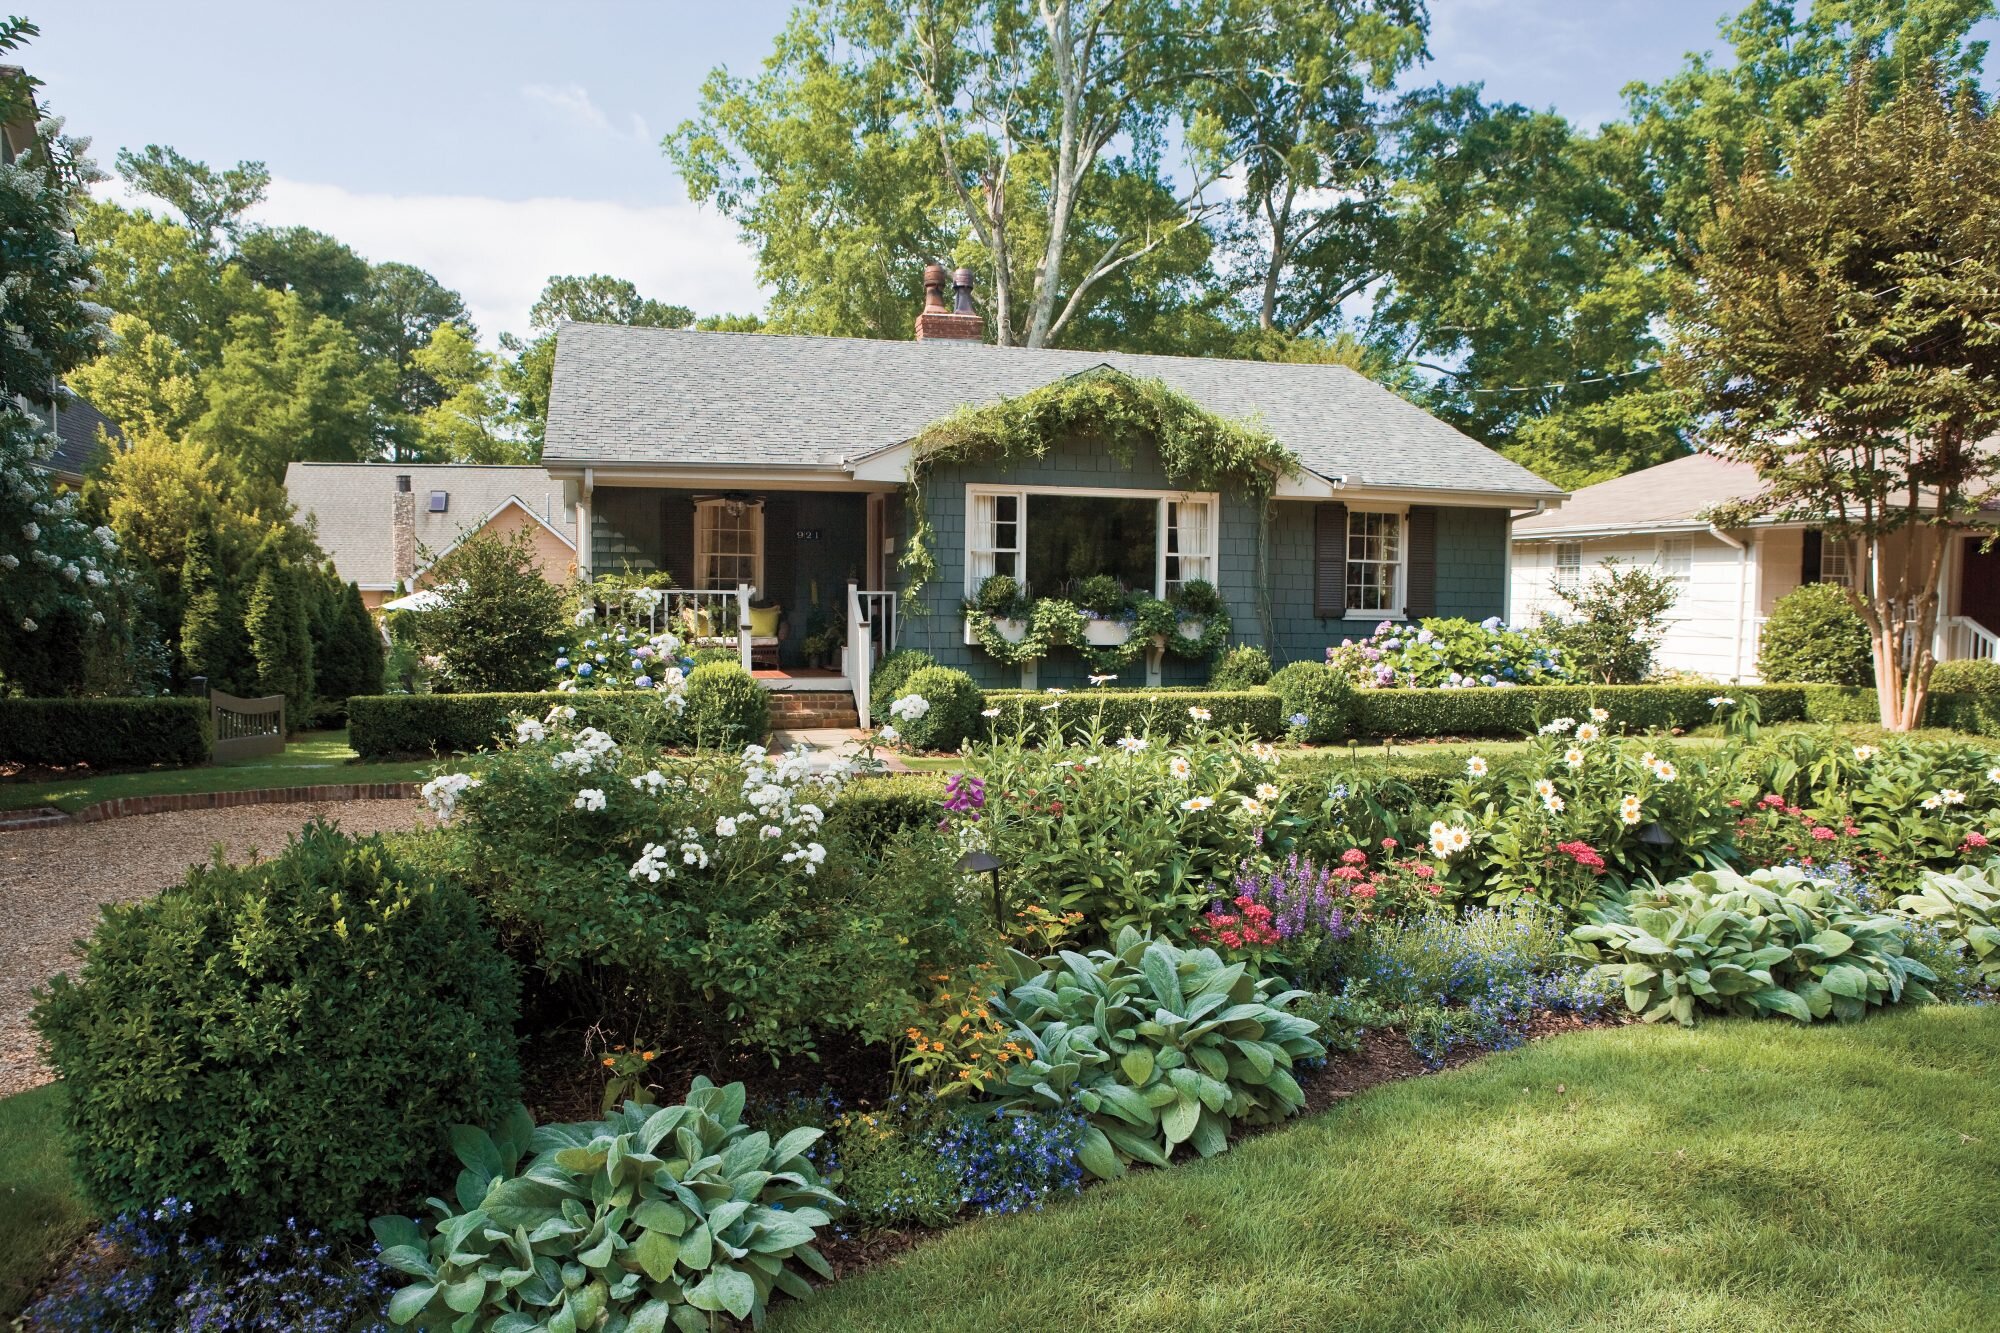 Improve your home with the best landscaping ideas